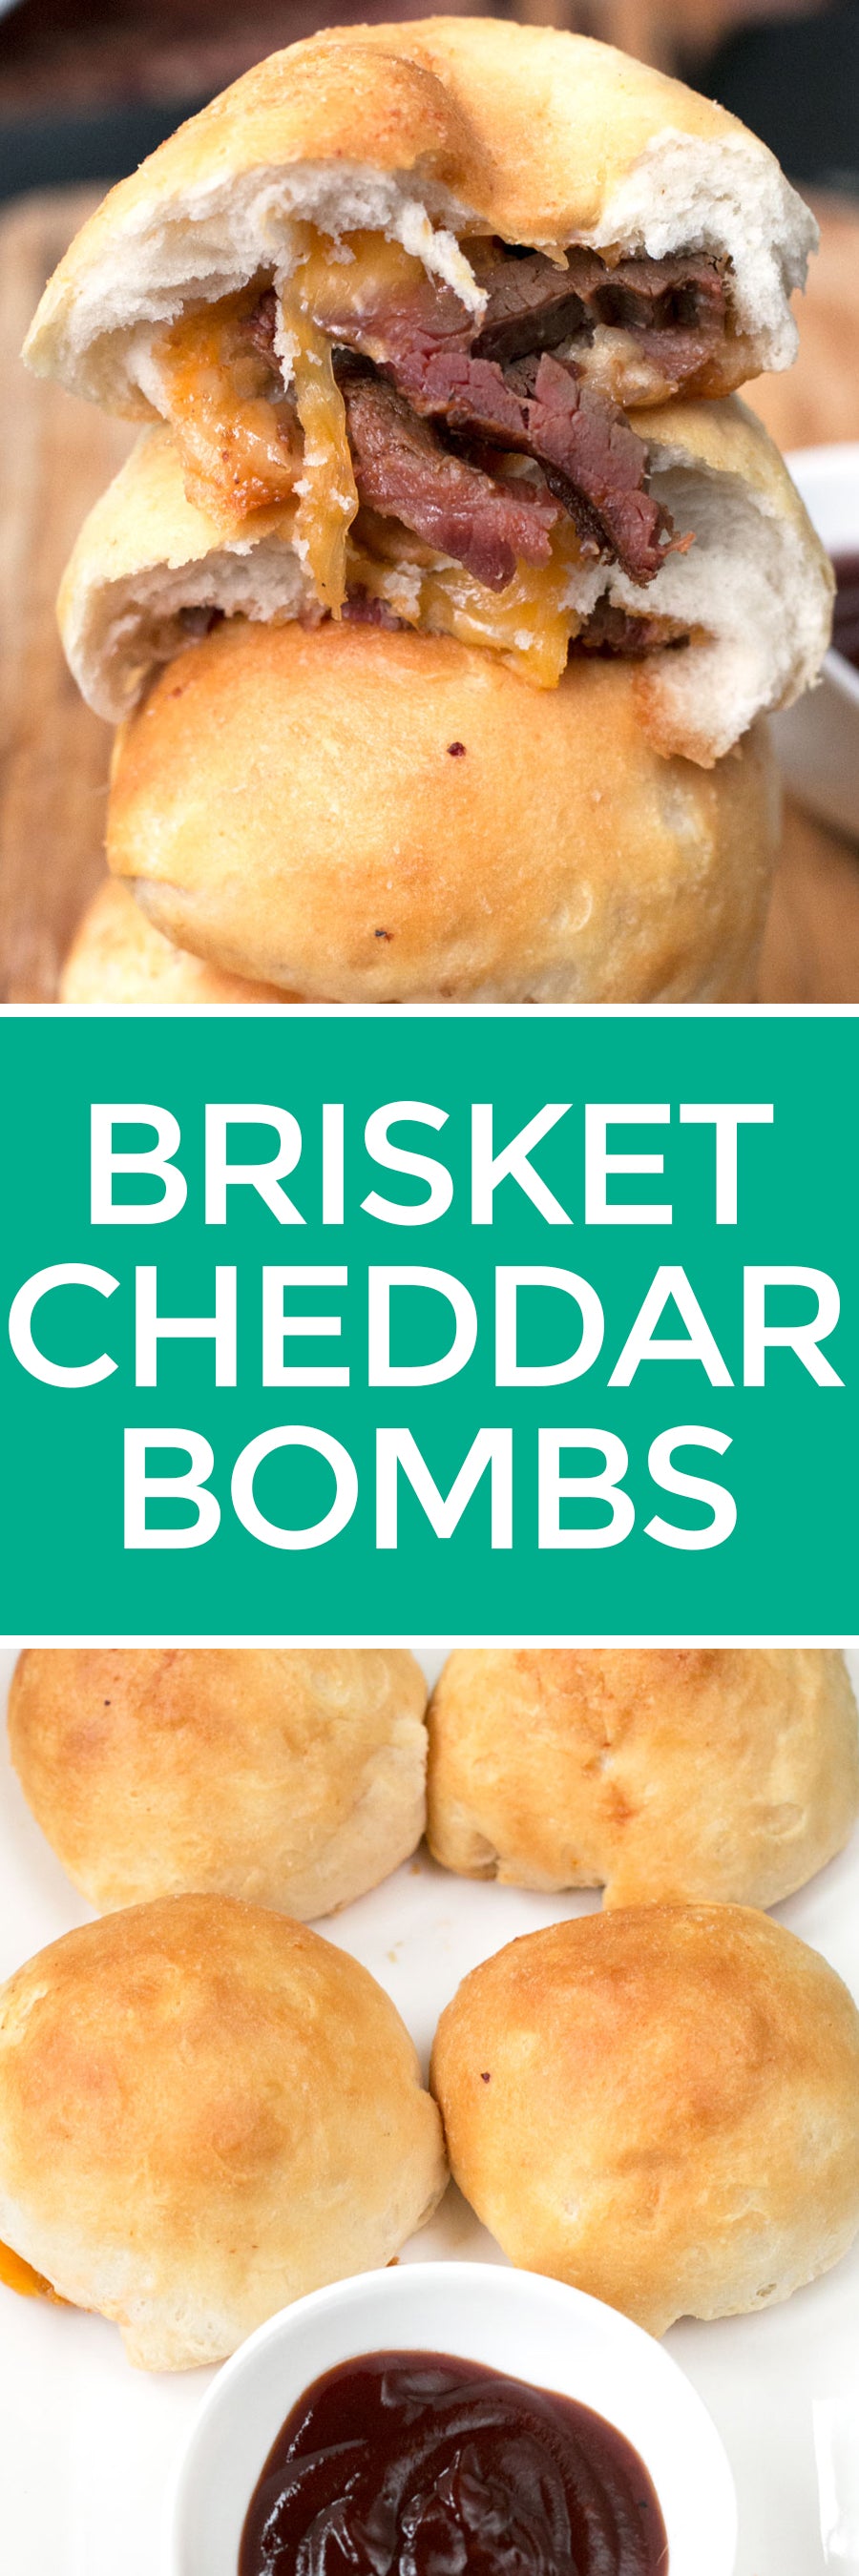 Brisket Cheddar Bombs | pigofthemonth.com #cheese #BBQ #barbecue #tailgating #recipe